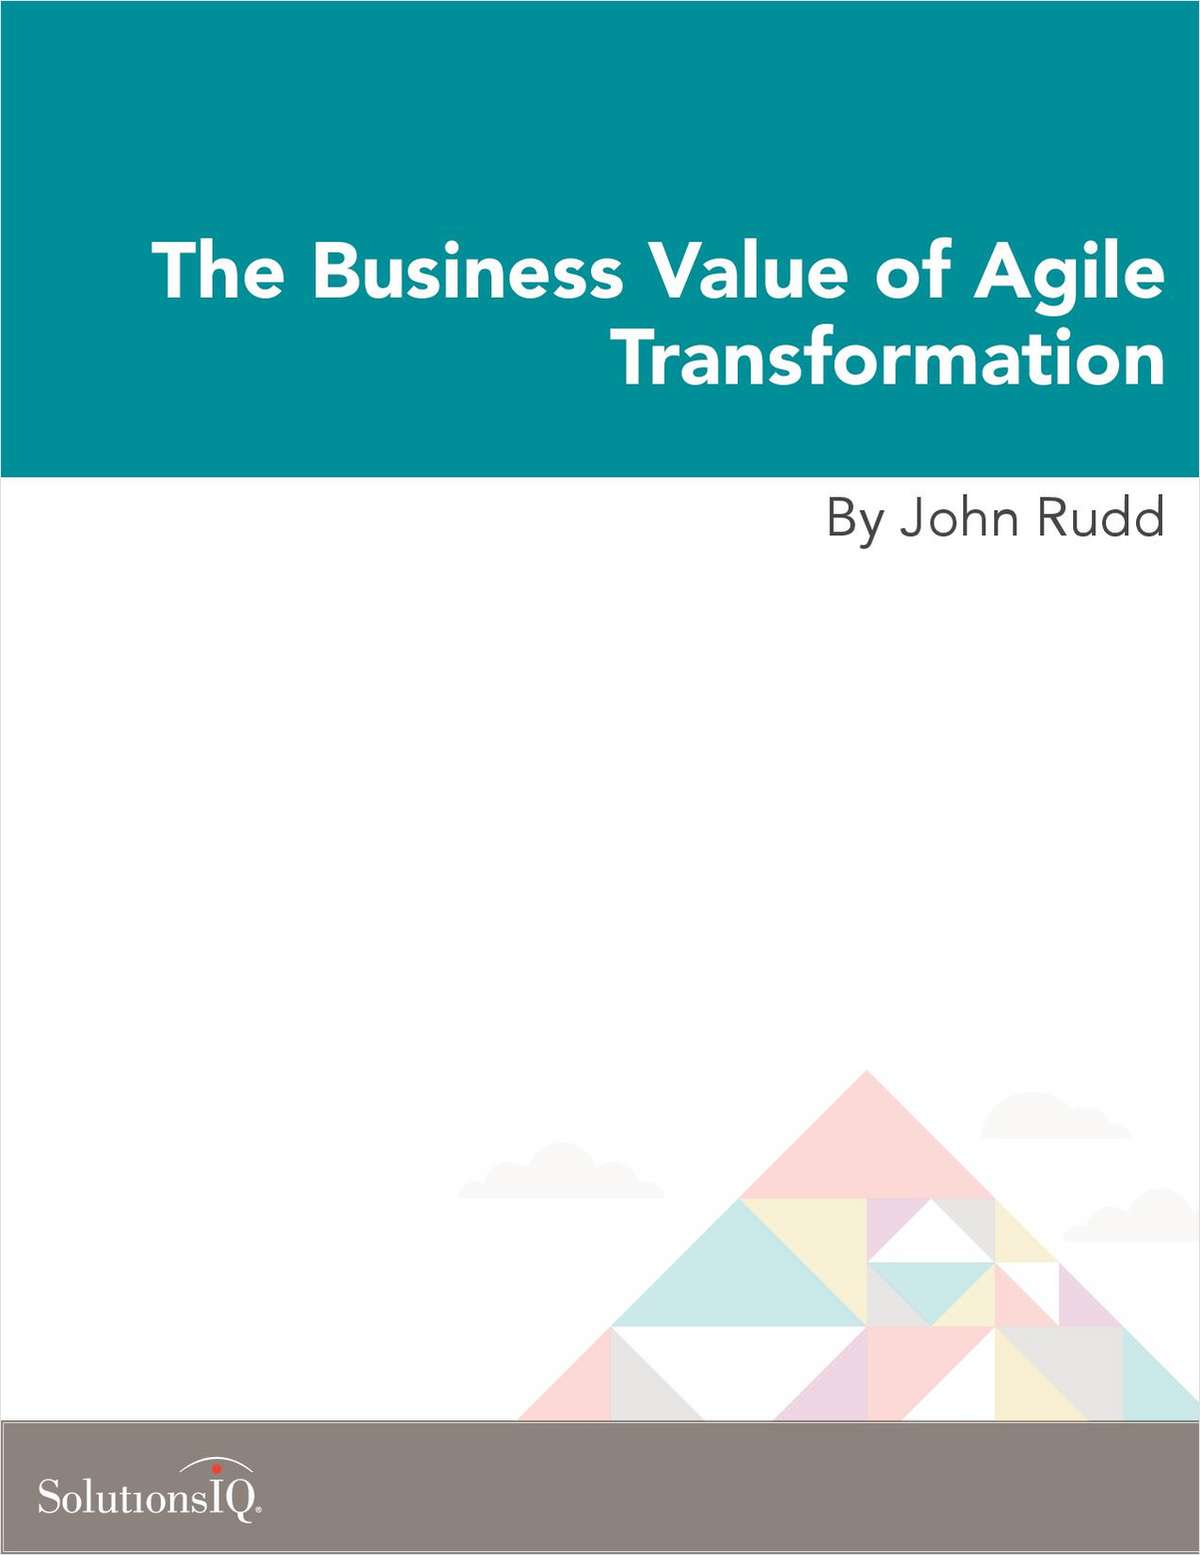 The Business Value of Agile Transformation